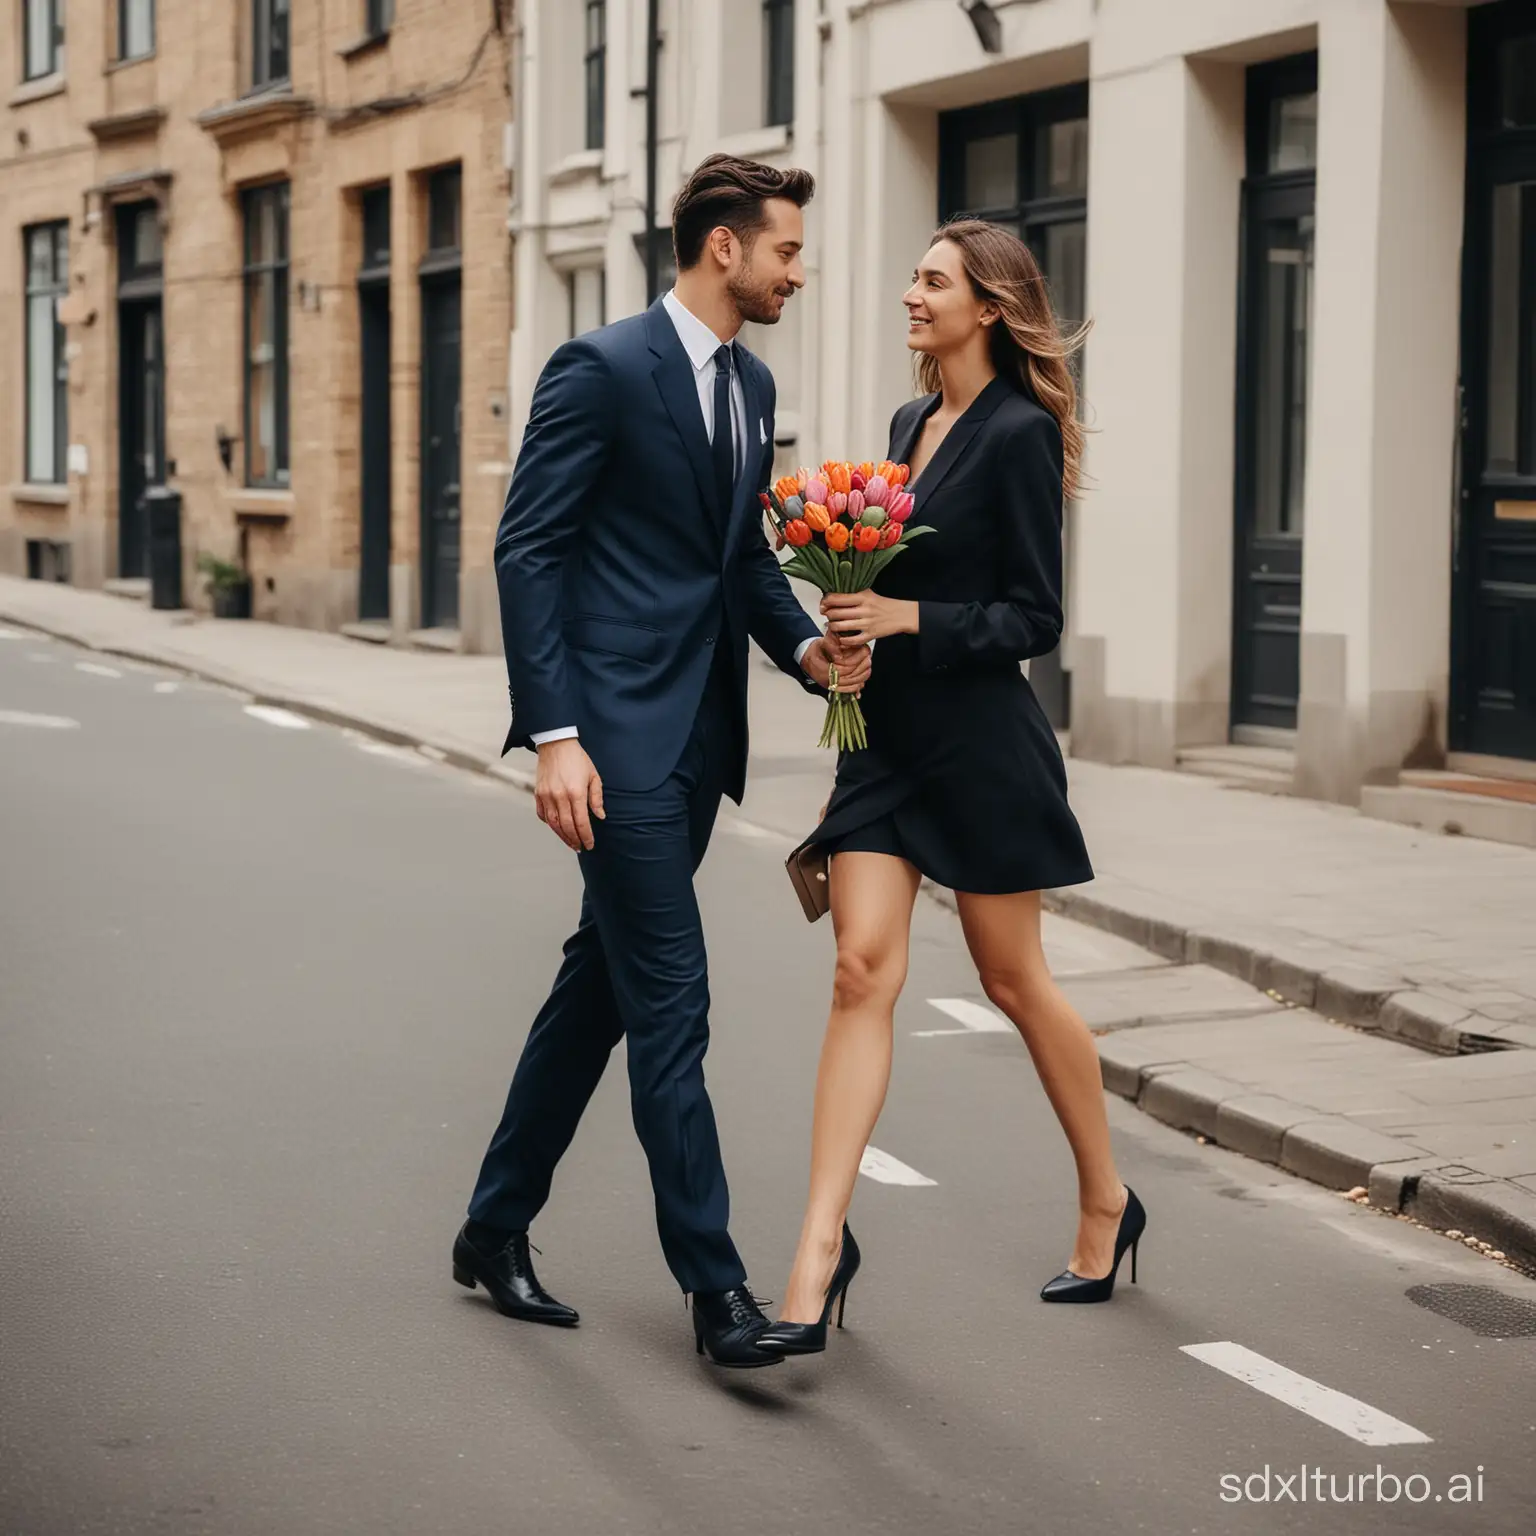 a couple walking on the street, the man holding a tulip bouquet and wearing navy suits with black shoes, the woman wears a black dress with high heels, romantic ambiant